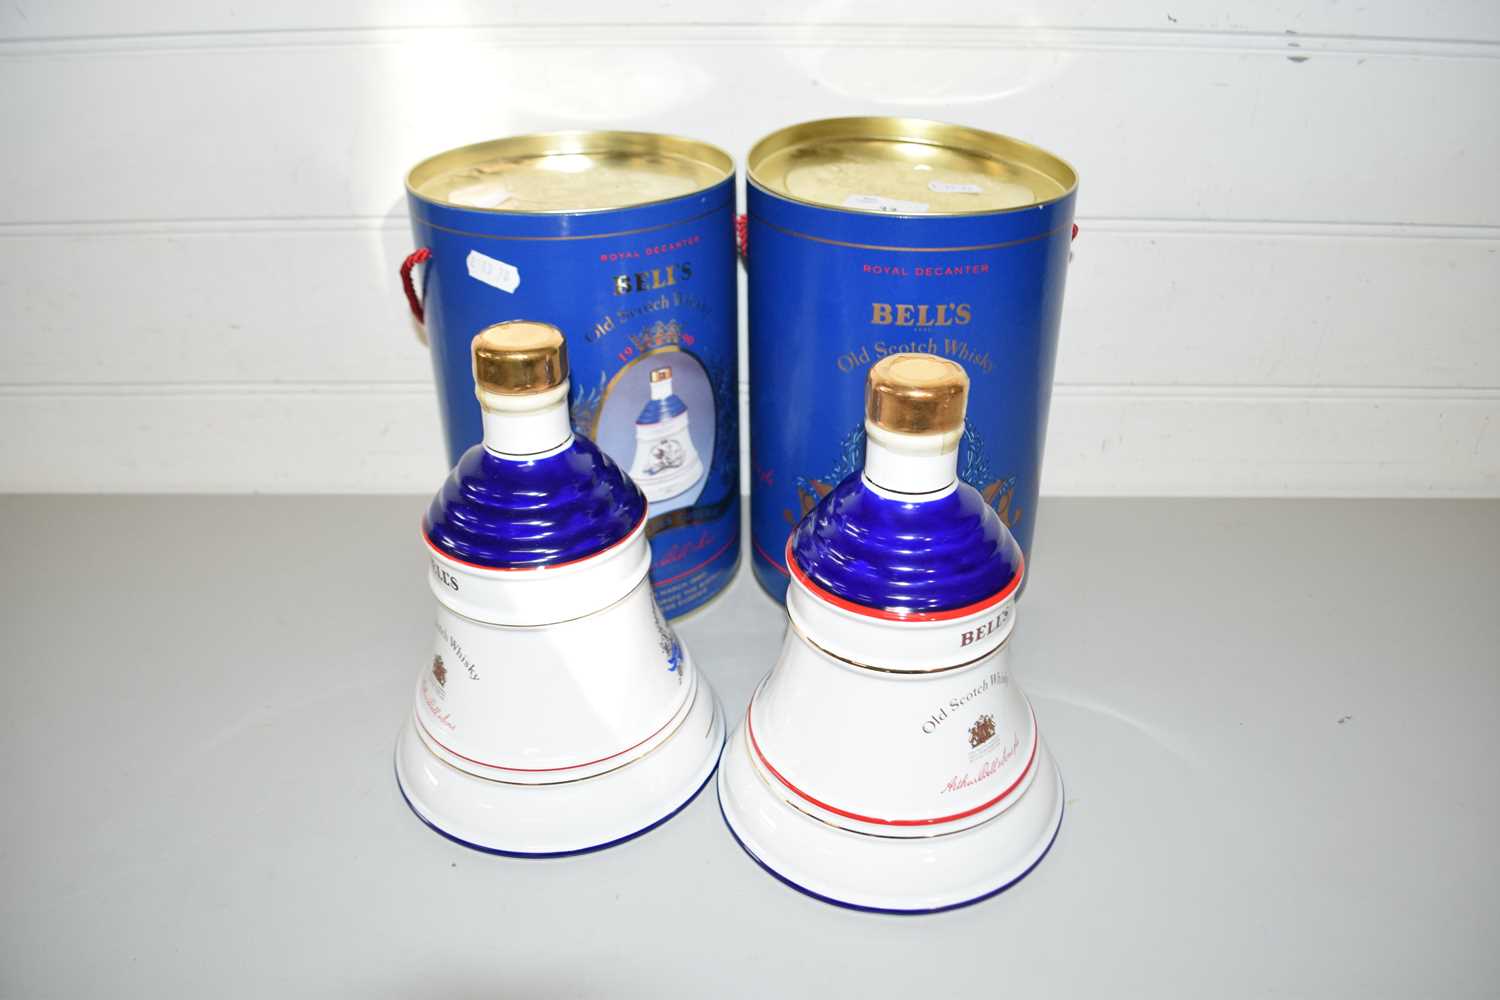 BELLS OLD SCOTCH WHISKEY WEIGHED DECANTERS COMMEMORATING THE BIRTH OF PRINCESS BEATRICE AND PRINCESS